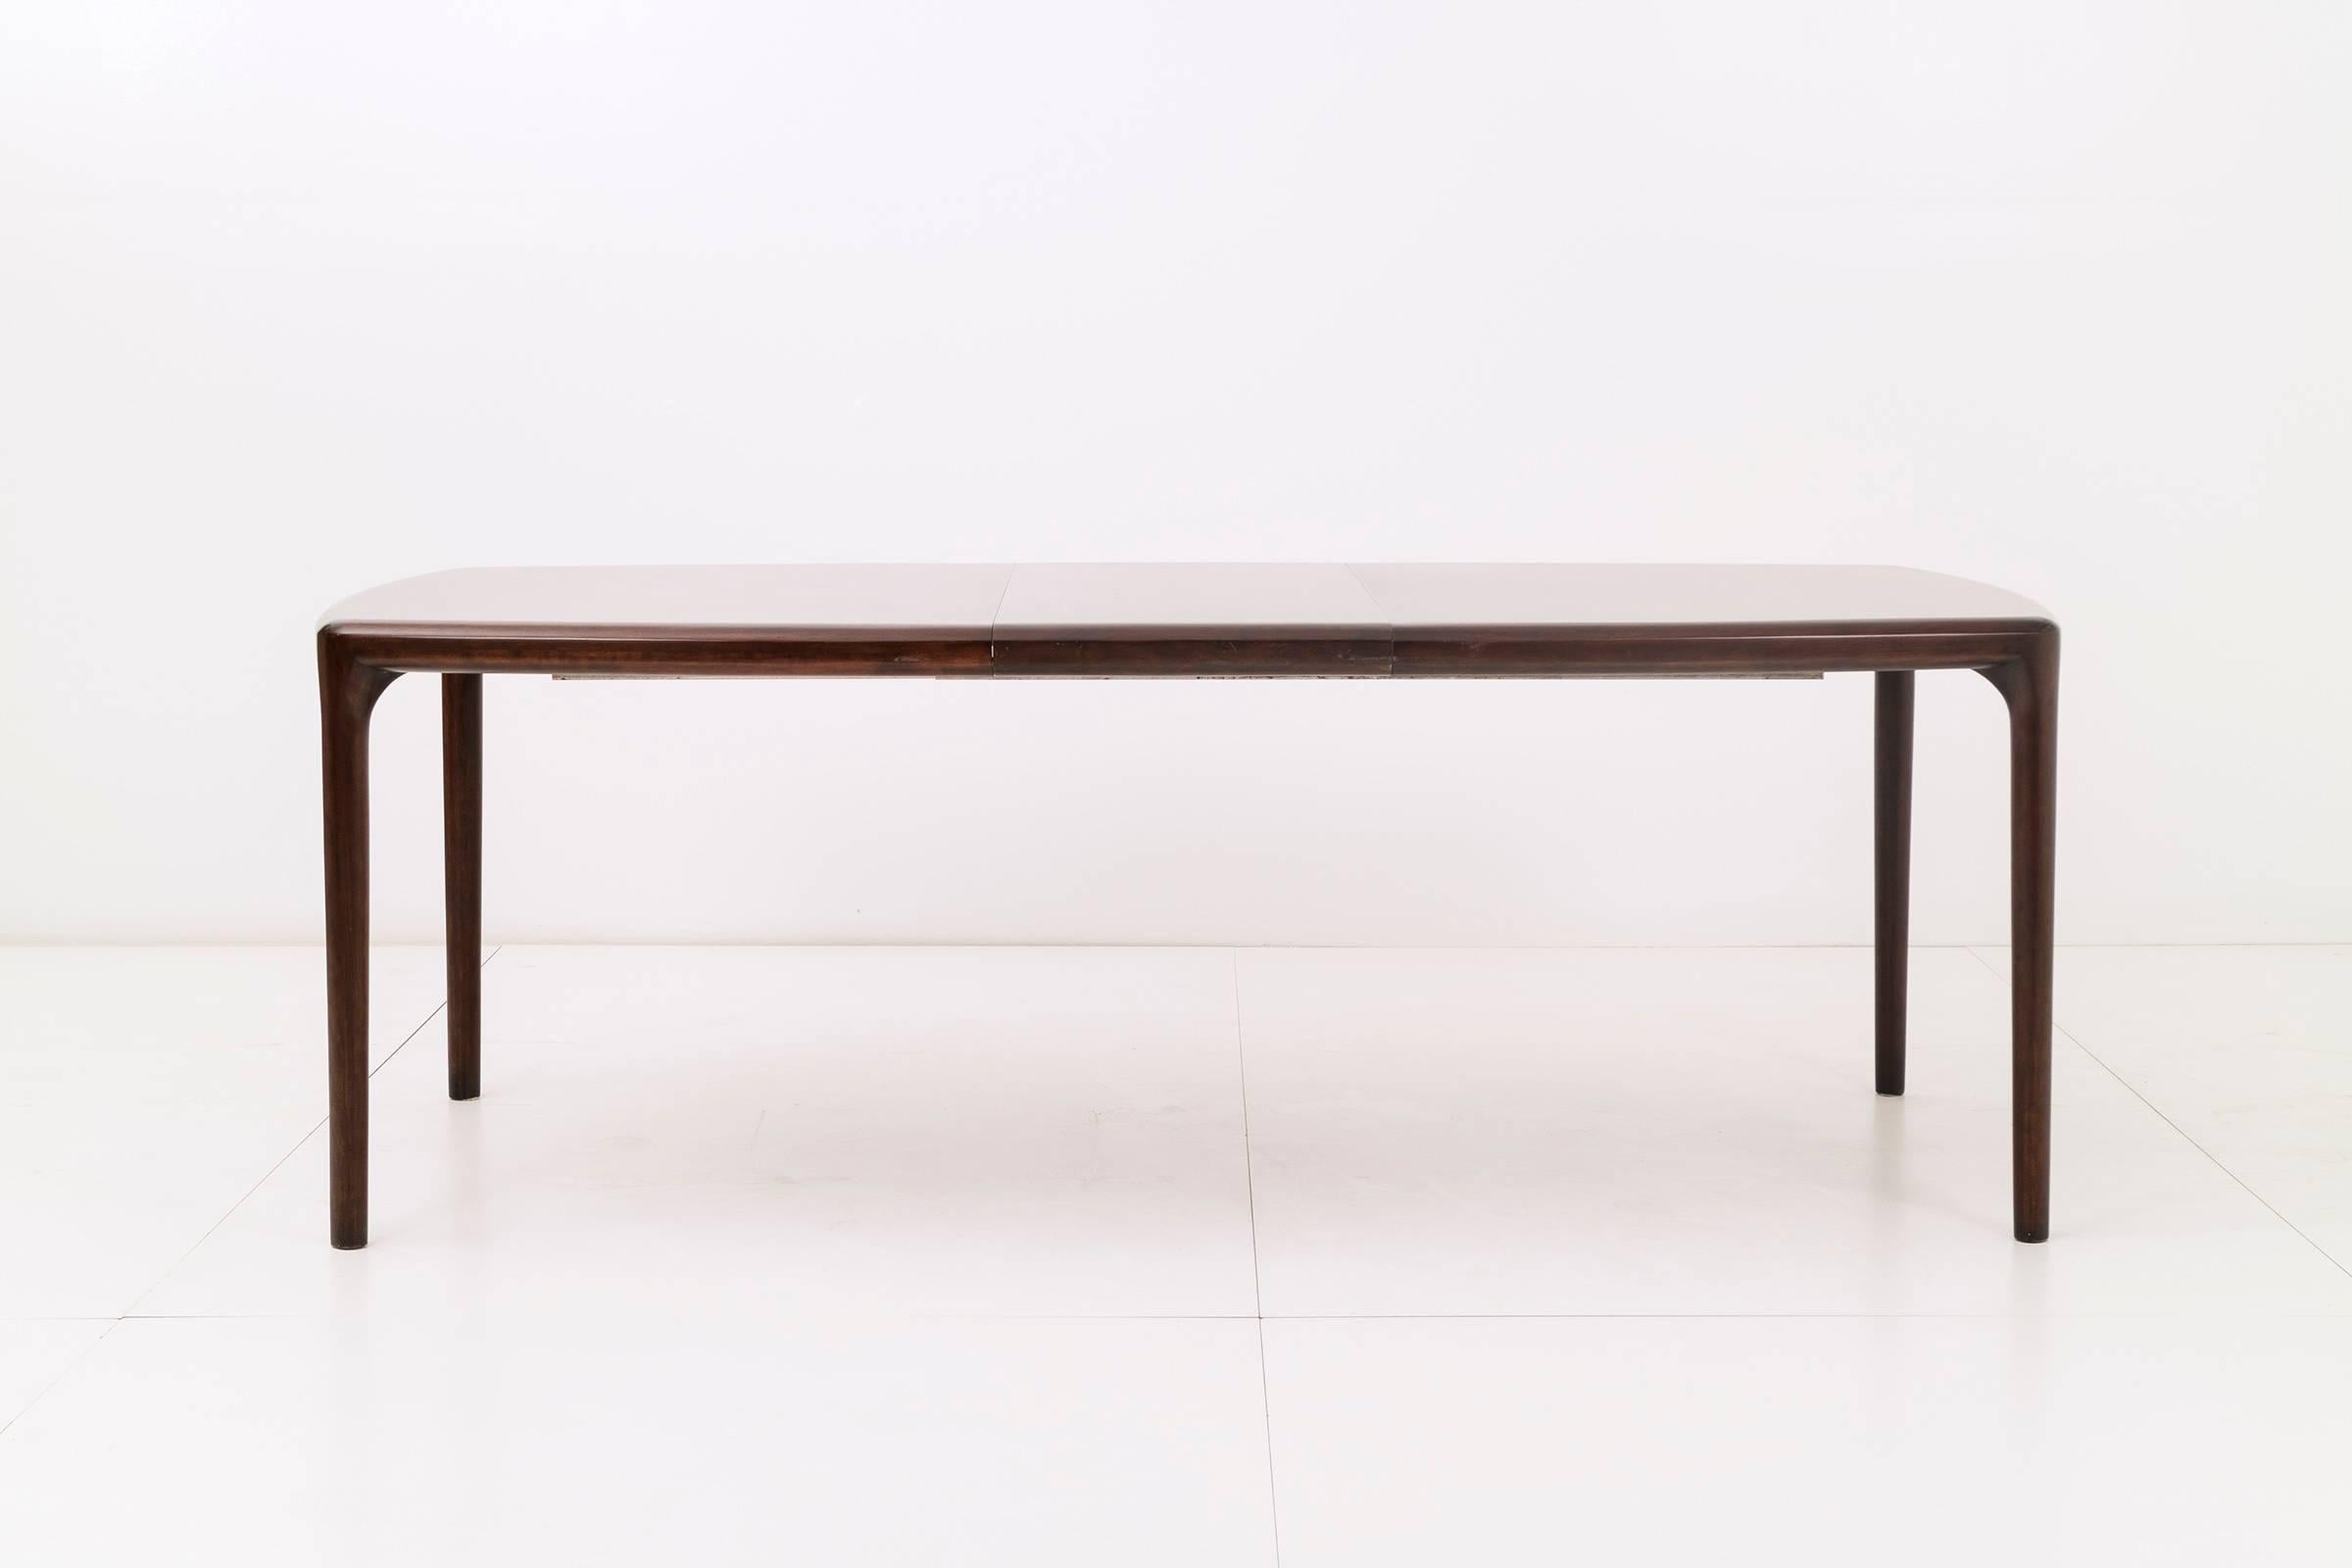 Solid mahogany dining table by Dunbar. This table has two18 in. leaves for a total length of 102 in.
Image 9 showing complex skilled joinery.
Signed Dunbar.
 
This item is currently on view in our NYC Greenwich Street Location.